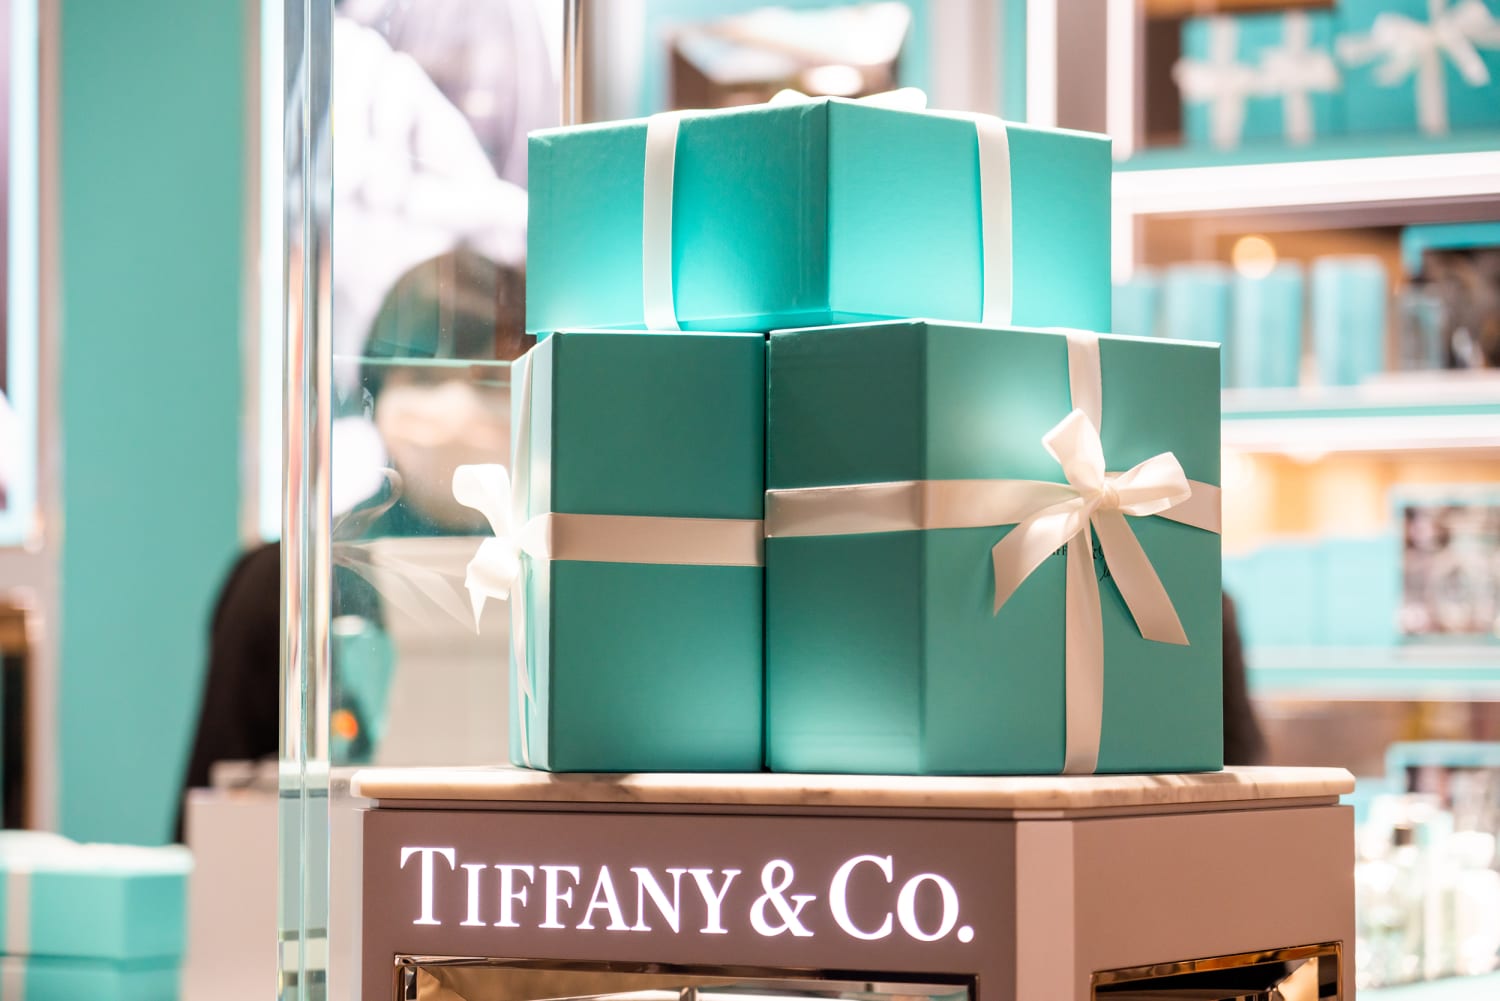 Tiffany customers ditching blue bags for plain ones as NYC crime soars